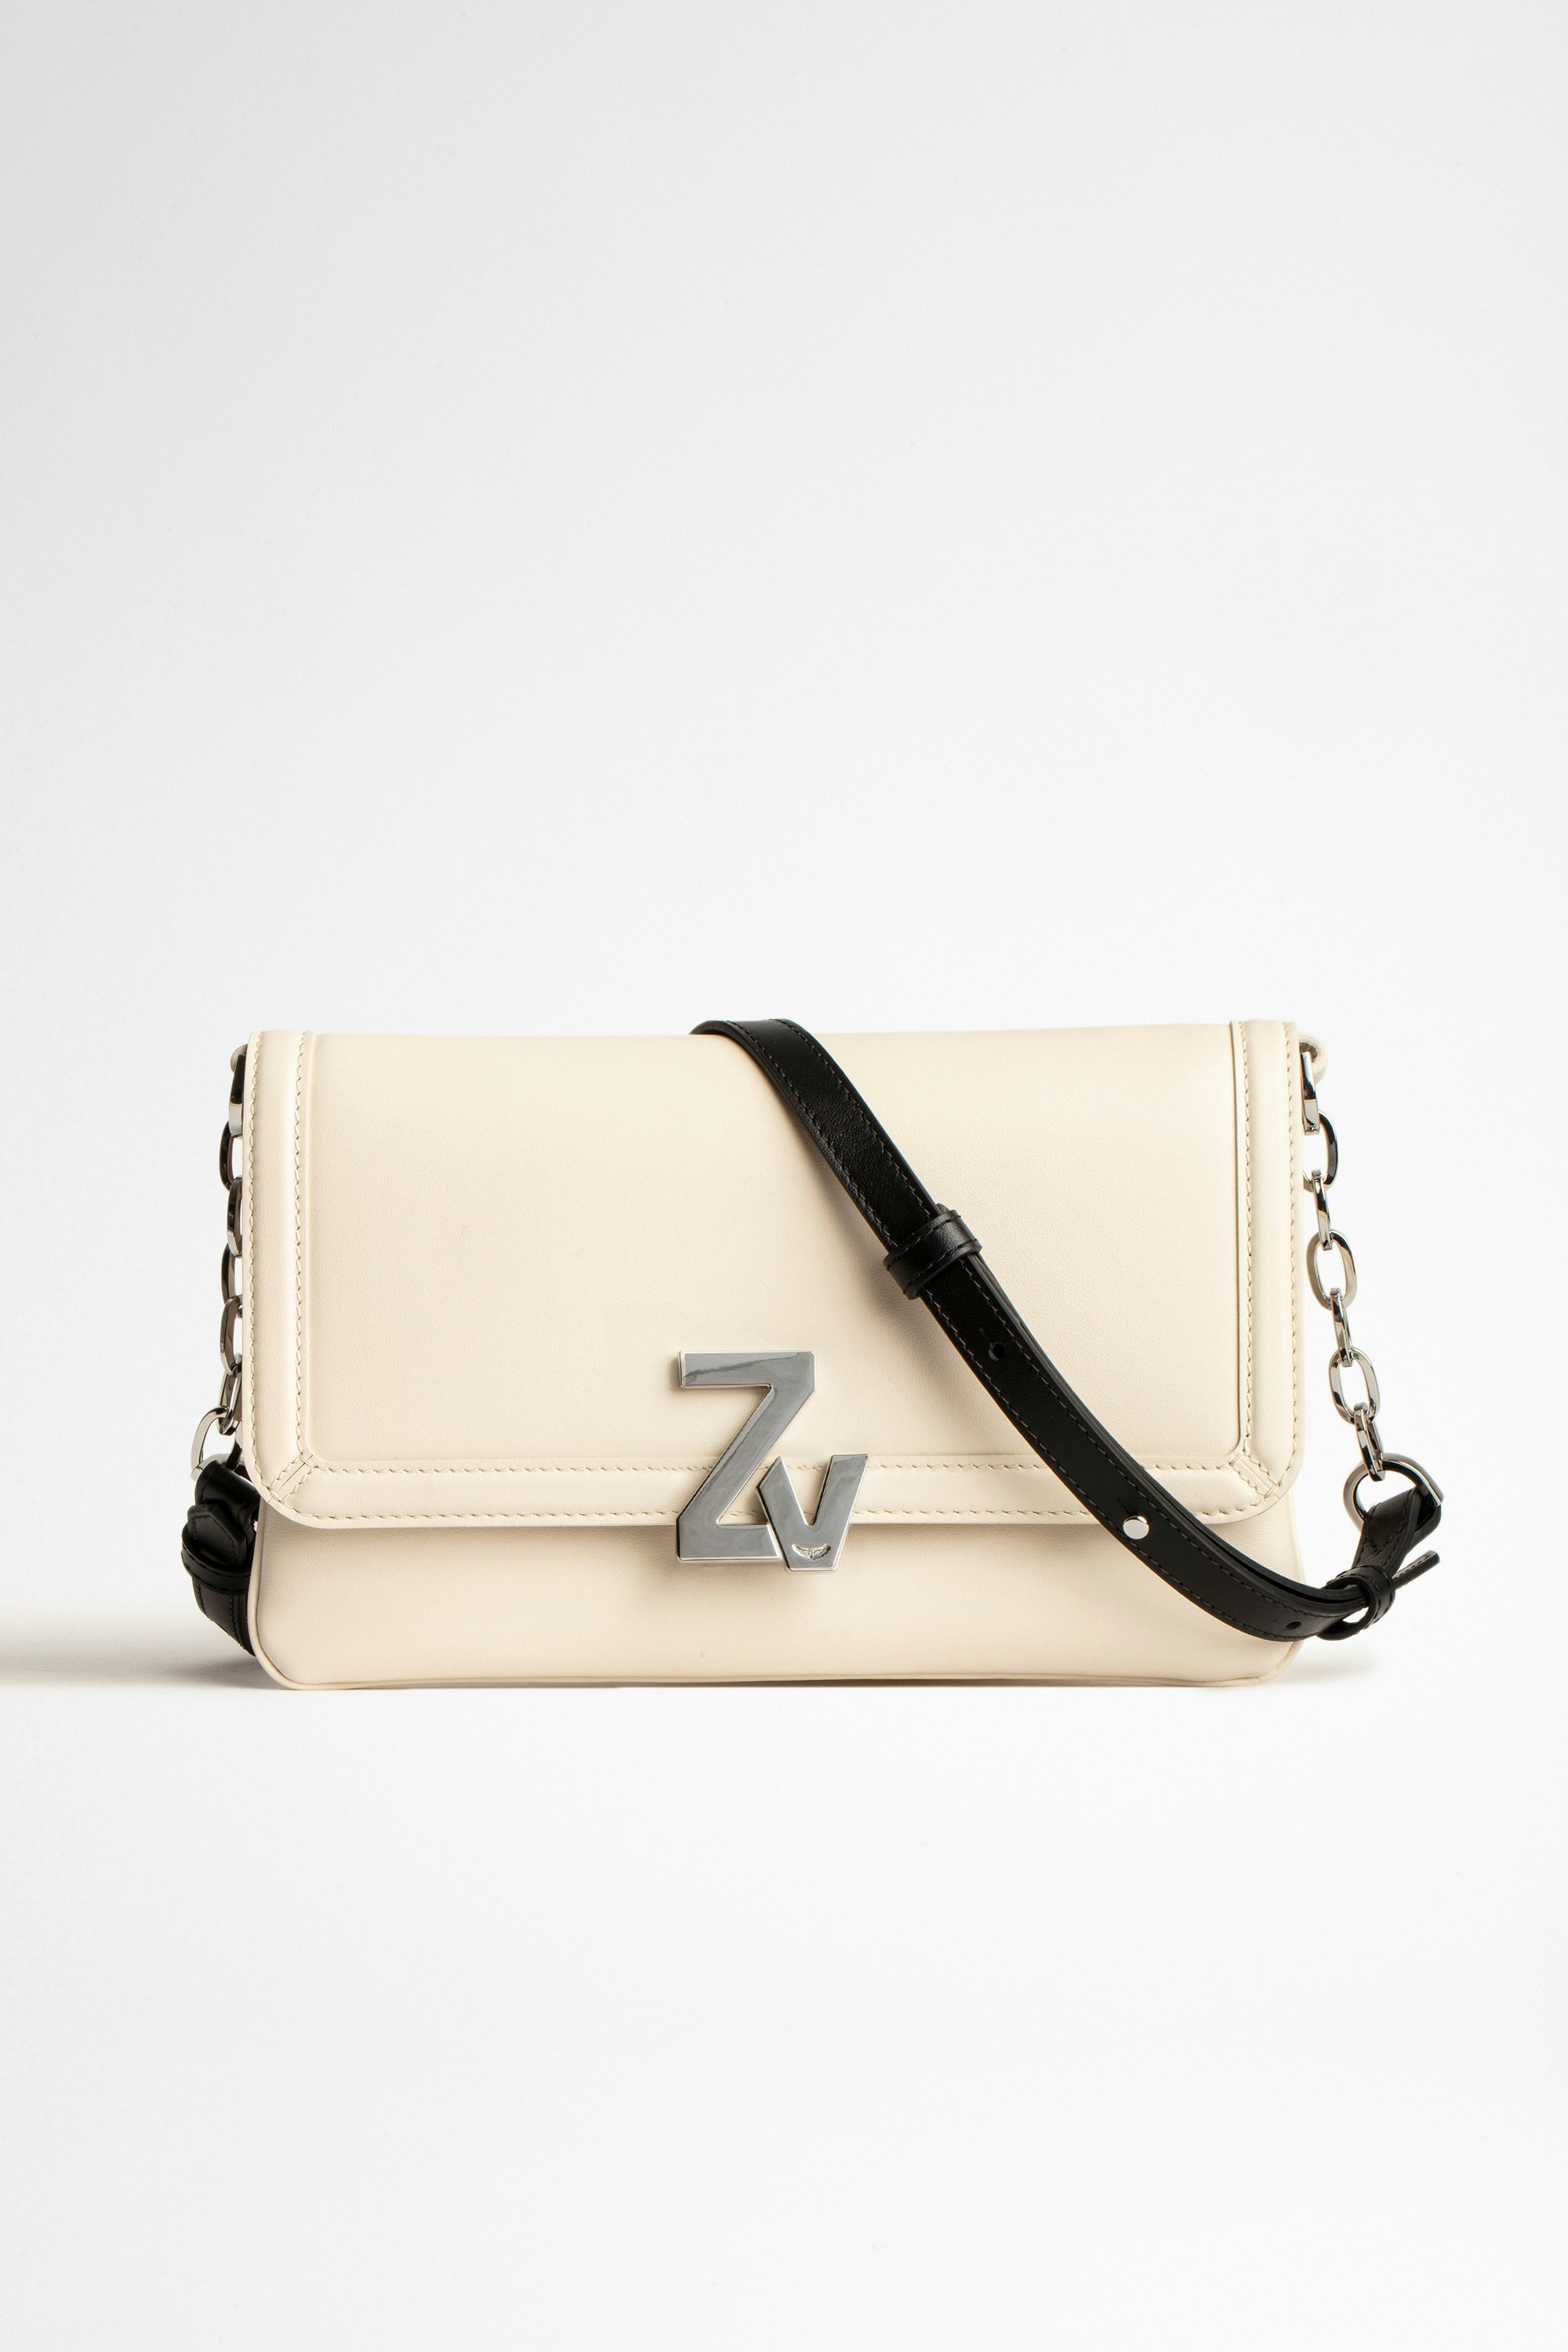 ZV Initiale La Clutch Bag Women’s smooth leather clutch bag with ZV monogram